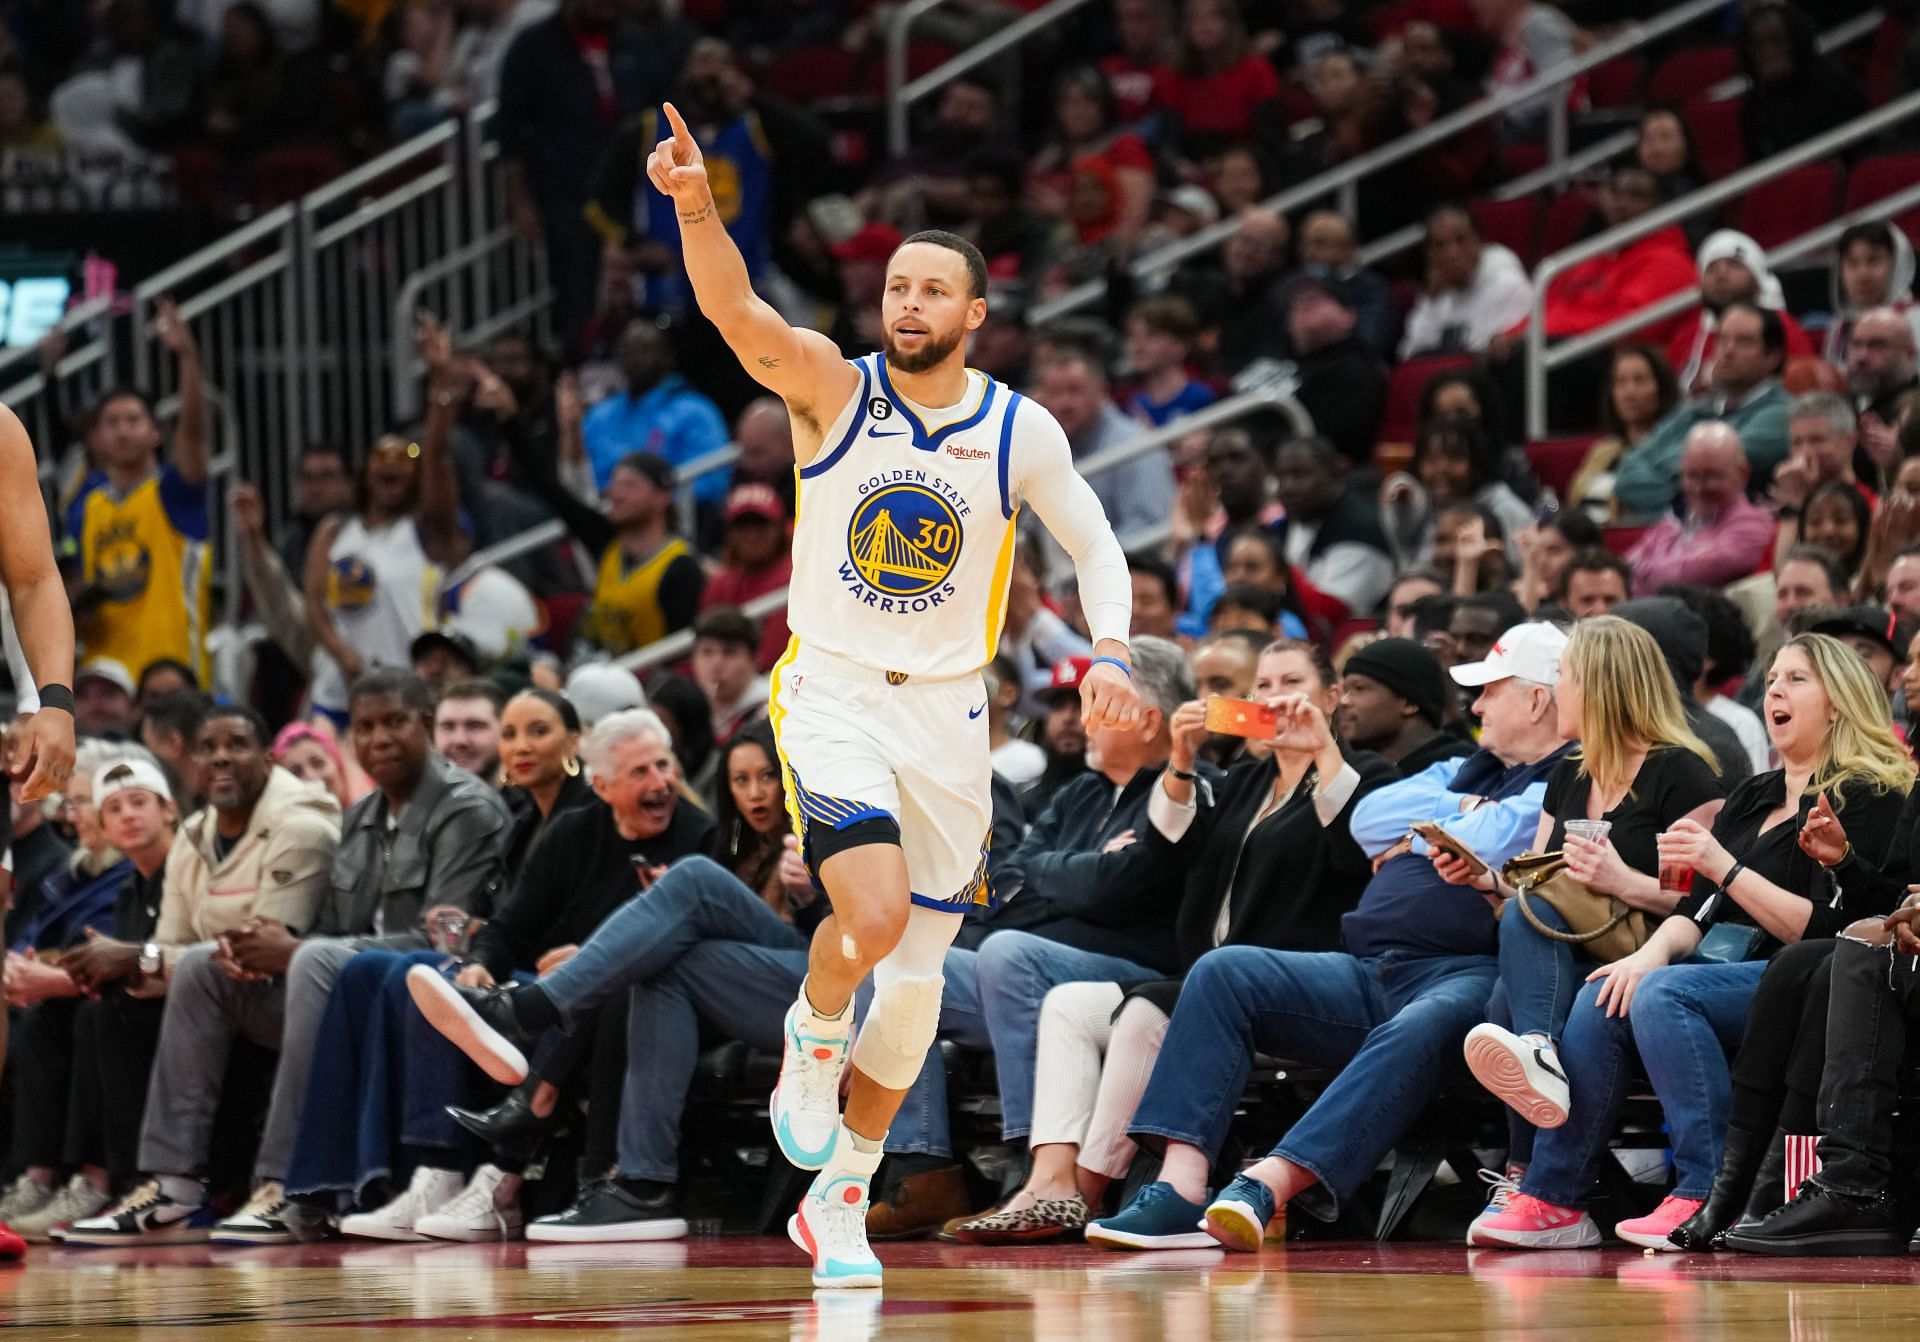 Stephen Curry #30 of the Golden State Warriors reacts after making a three-point shot against the Houston Rockets